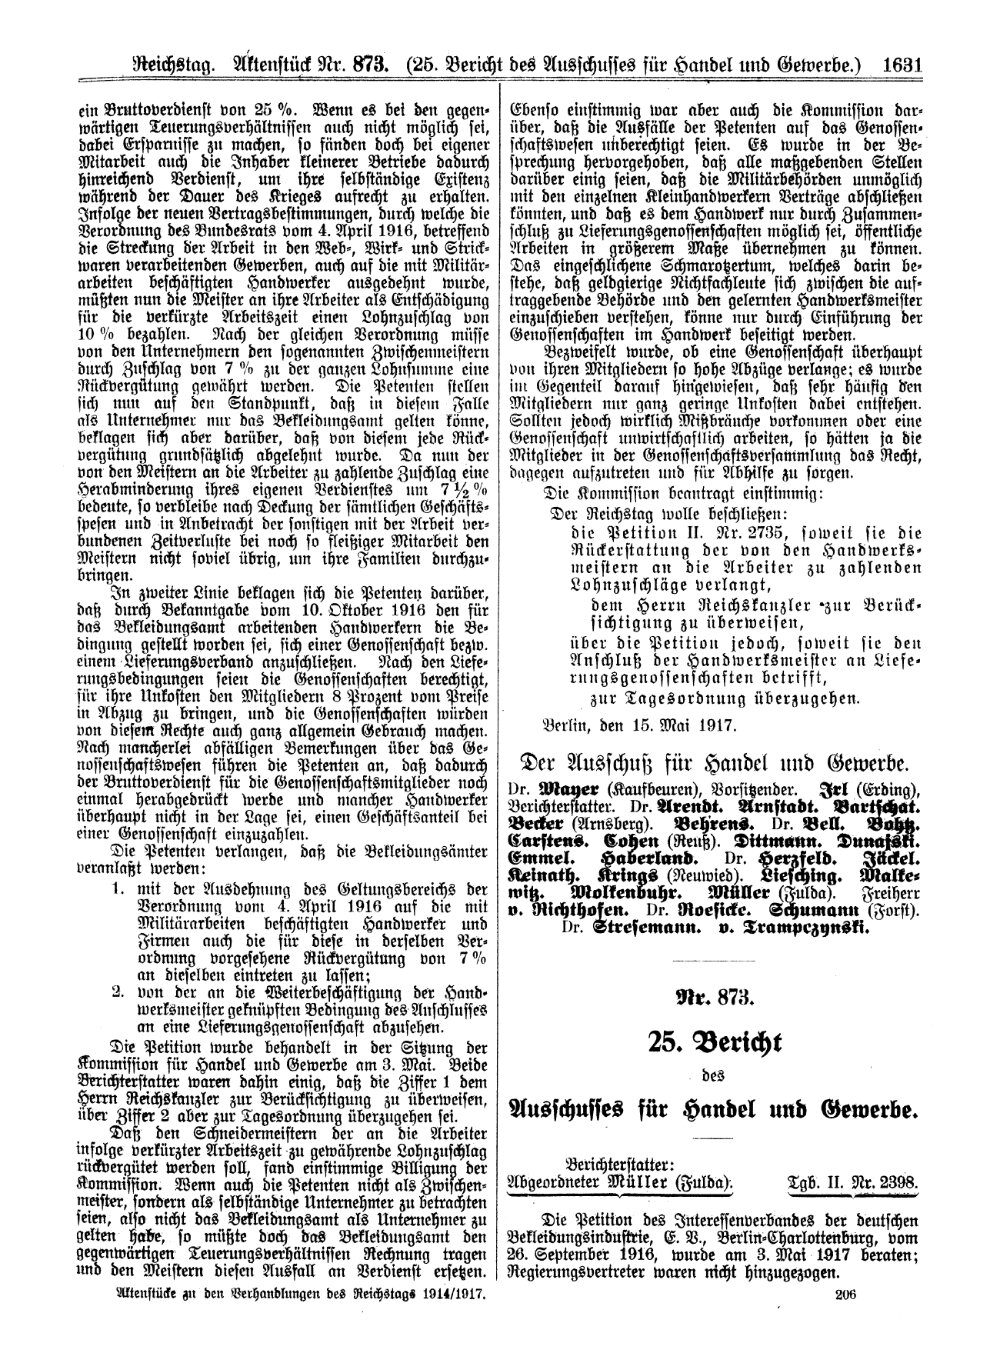 Scan of page 1631